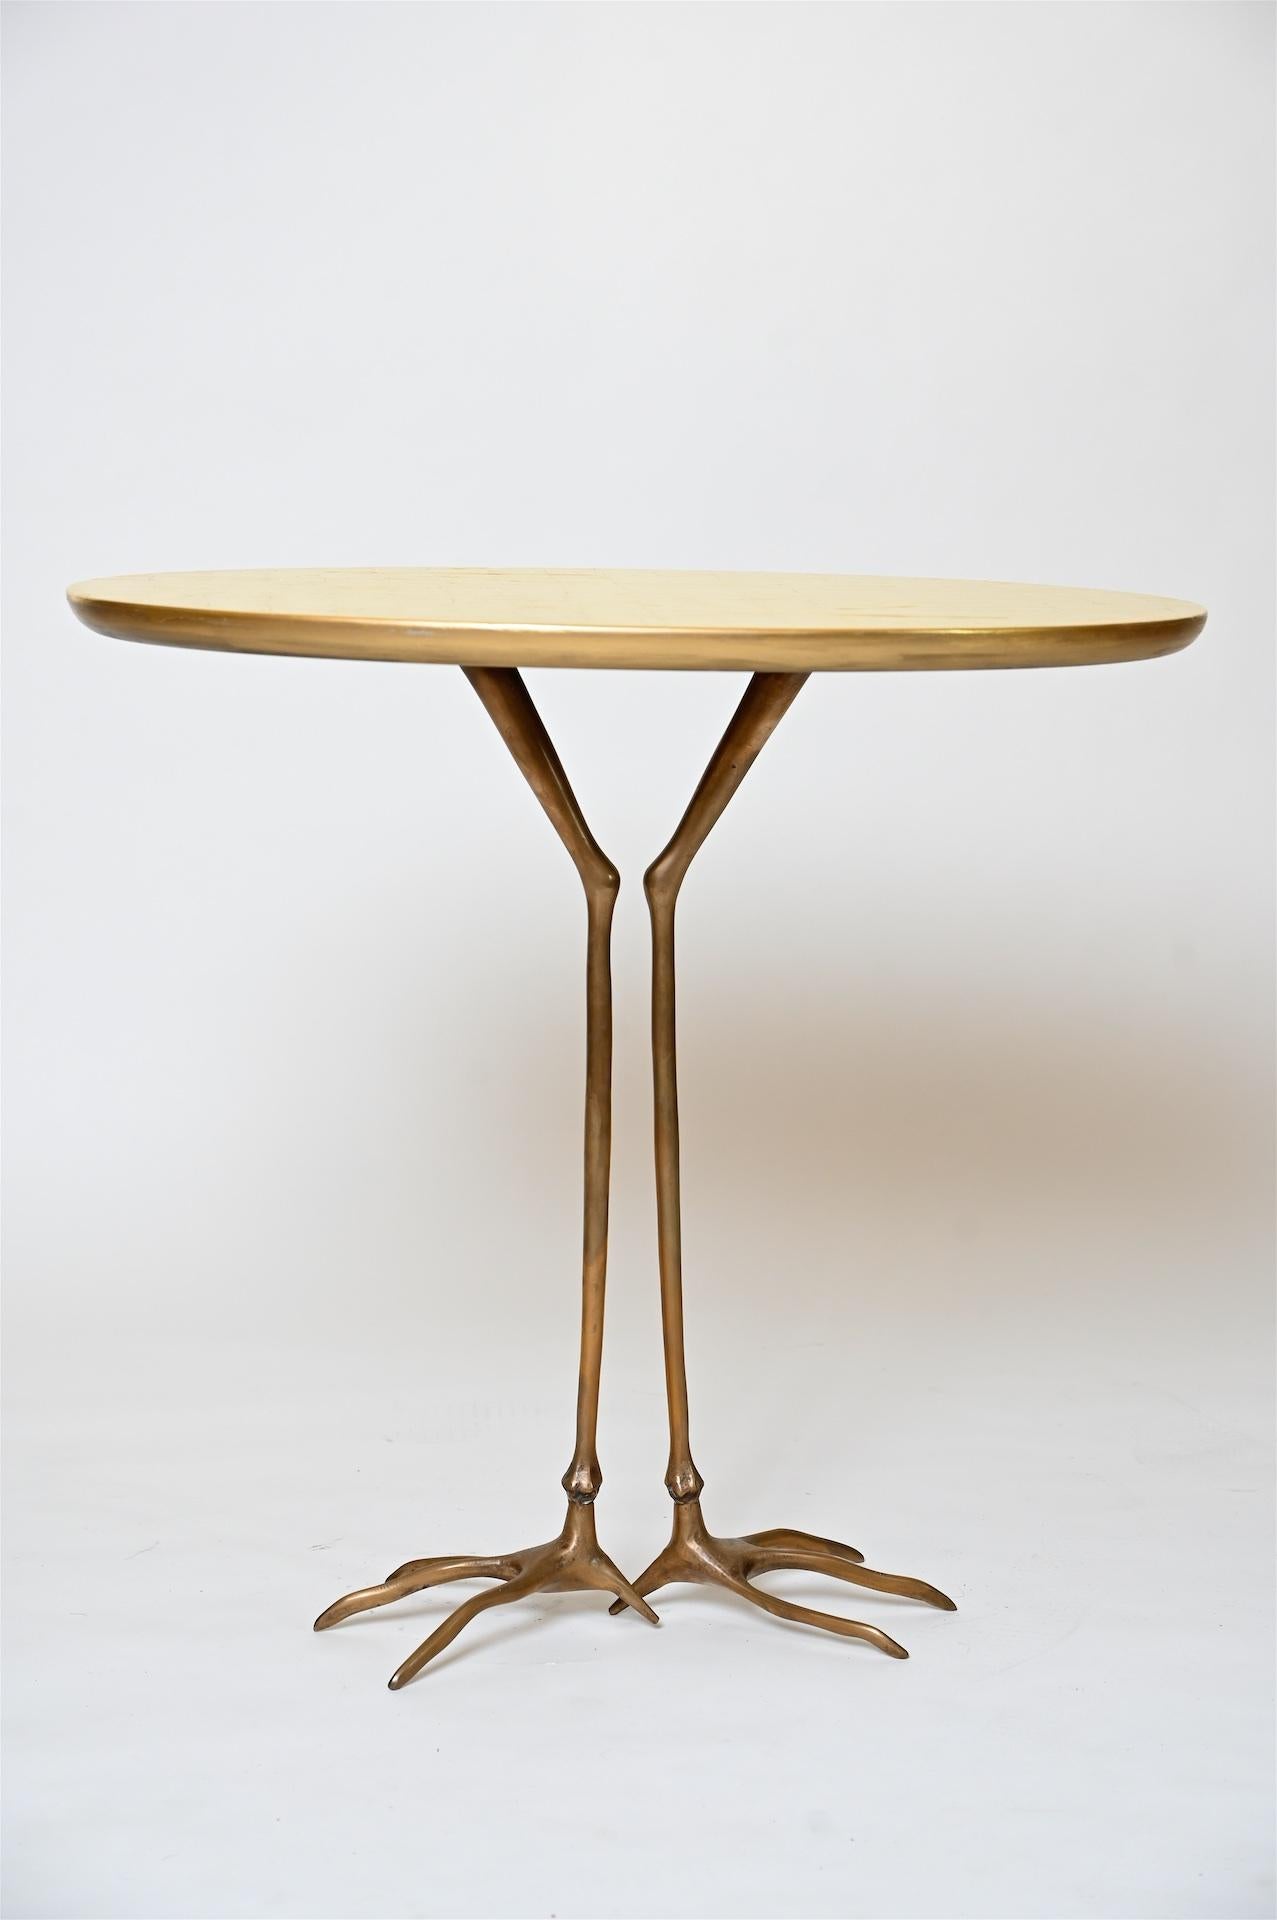 Wood Gold Leaf 'Traccia' Table by Meret Oppenheim